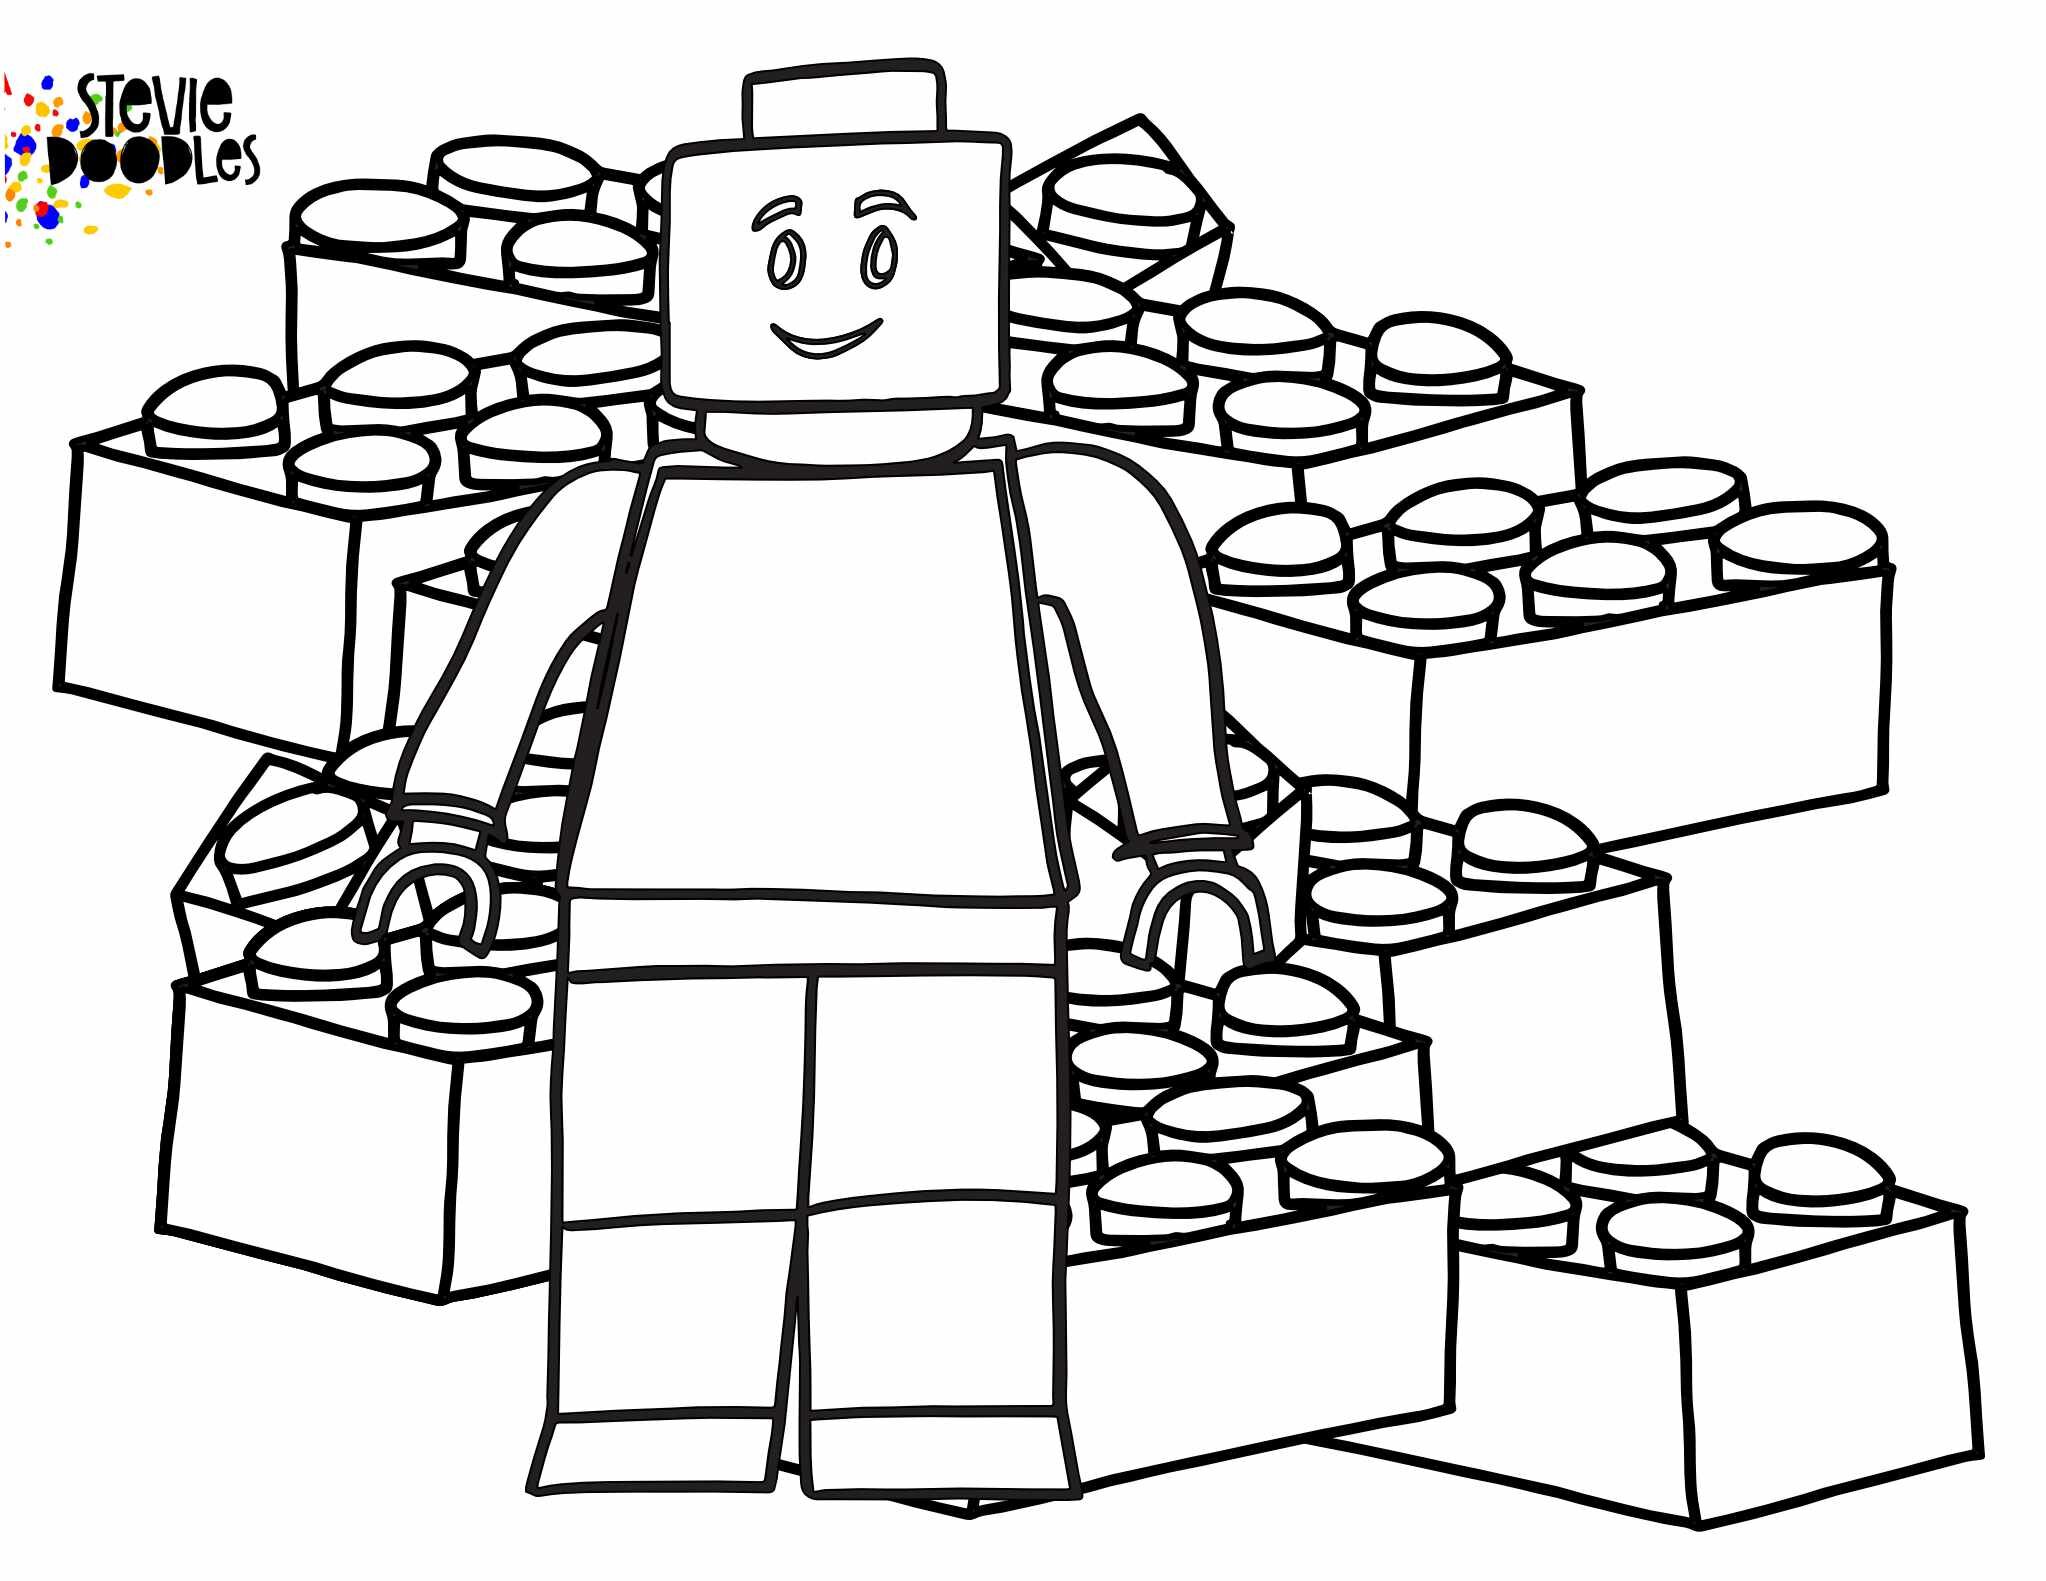 a lego man standing in front of a pile of lego bricks to color